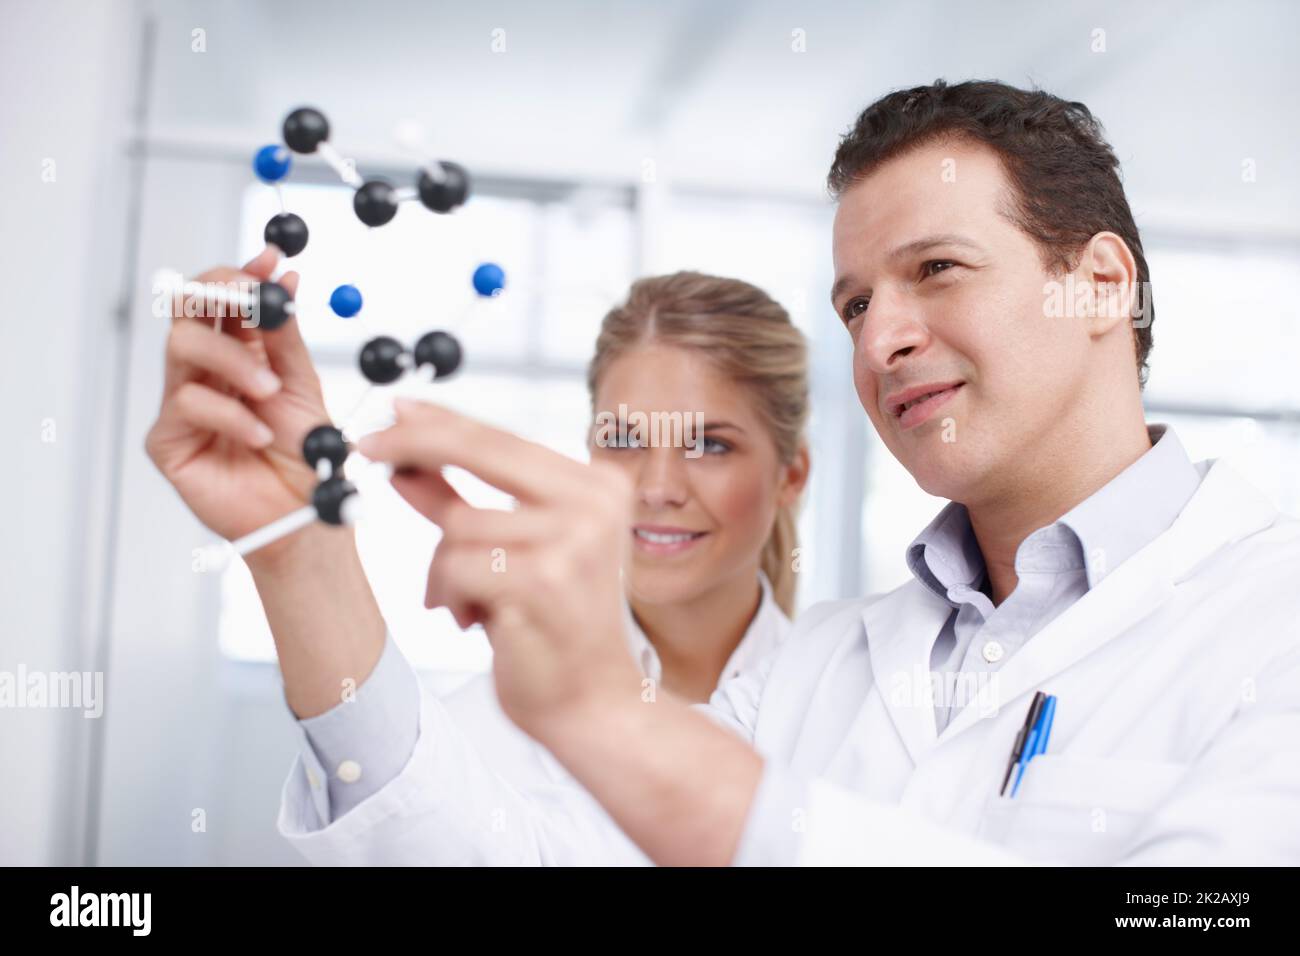 Molecular structures are fascinating. Two scientists looking at a molecular structure model. Stock Photo